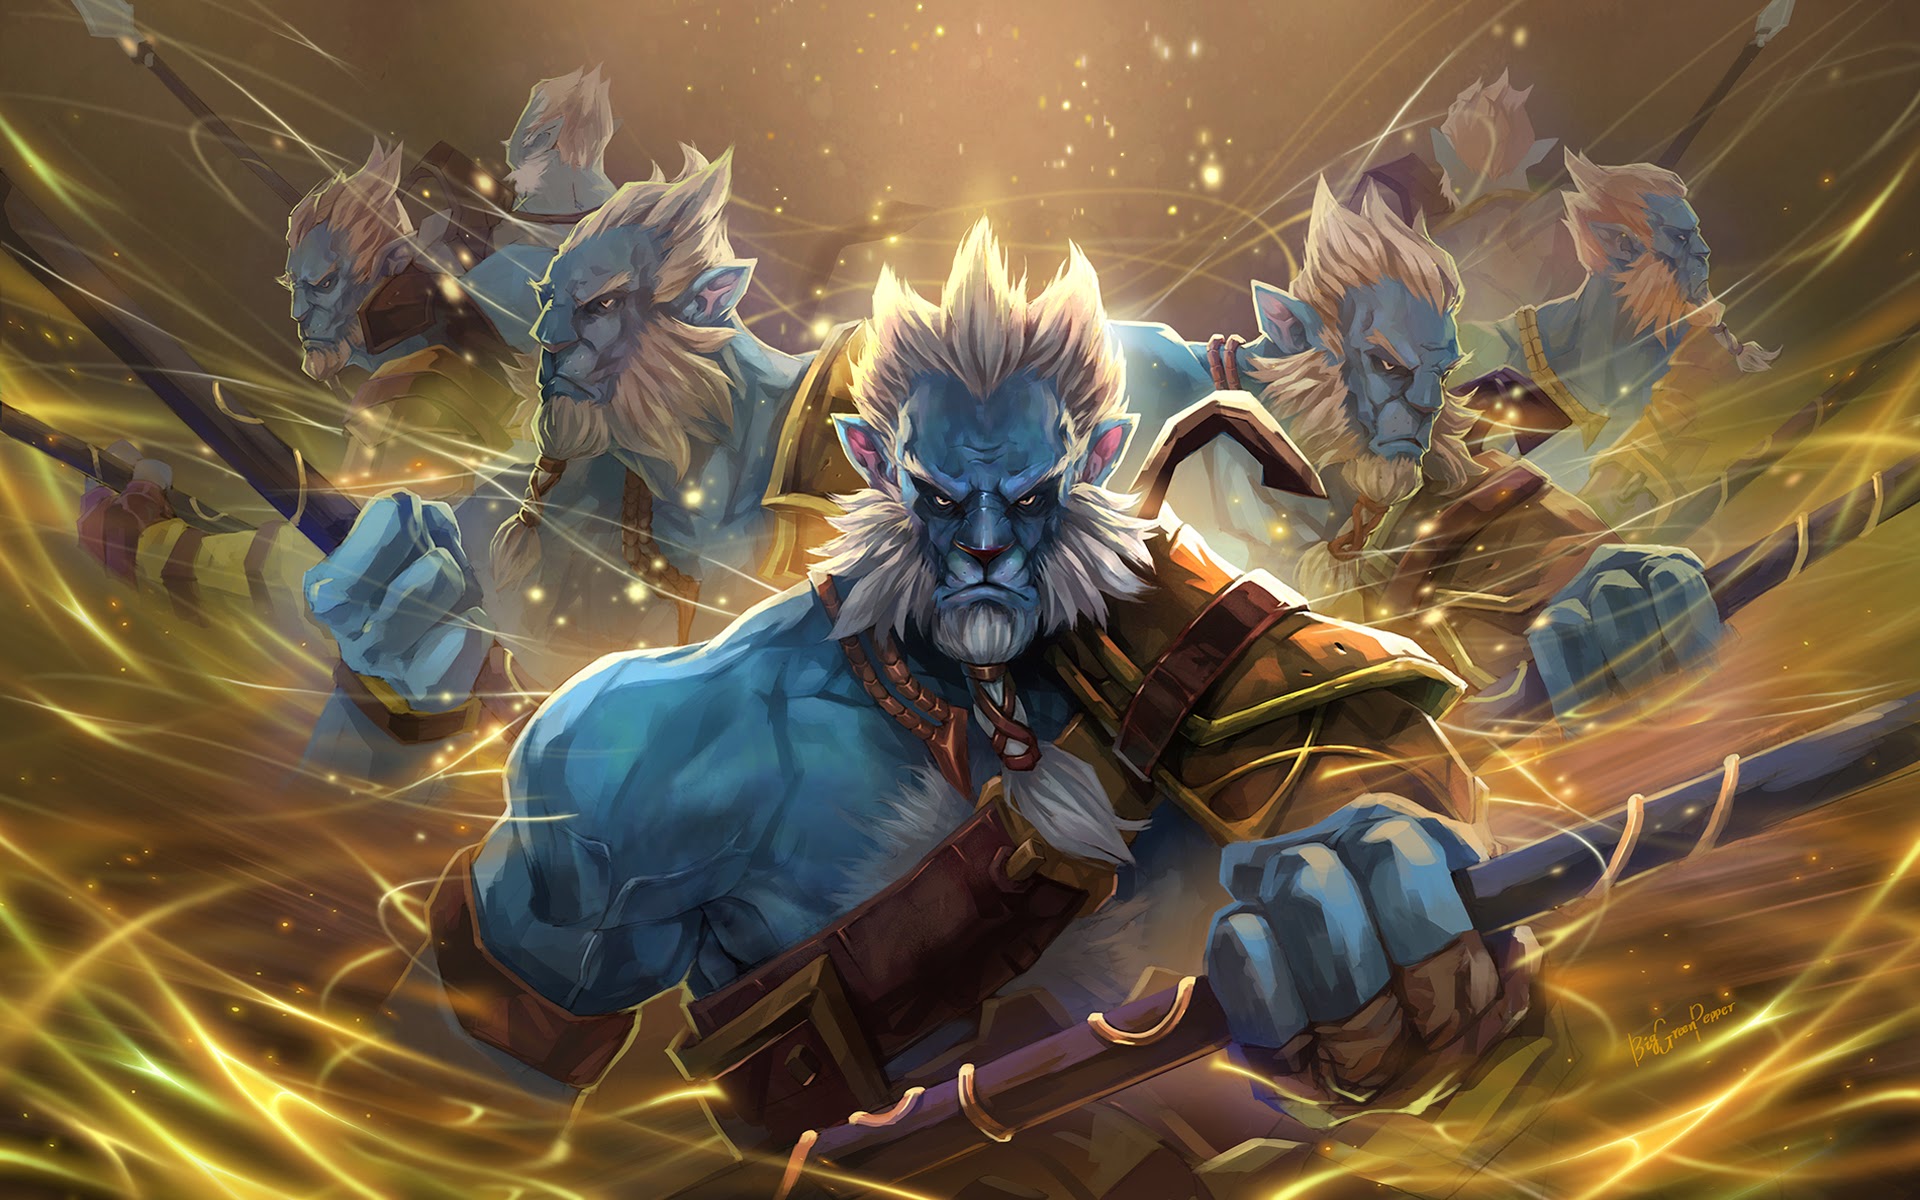 dota 2 4k wallpaper,action adventure game,strategy video game,cg artwork,games,warlord